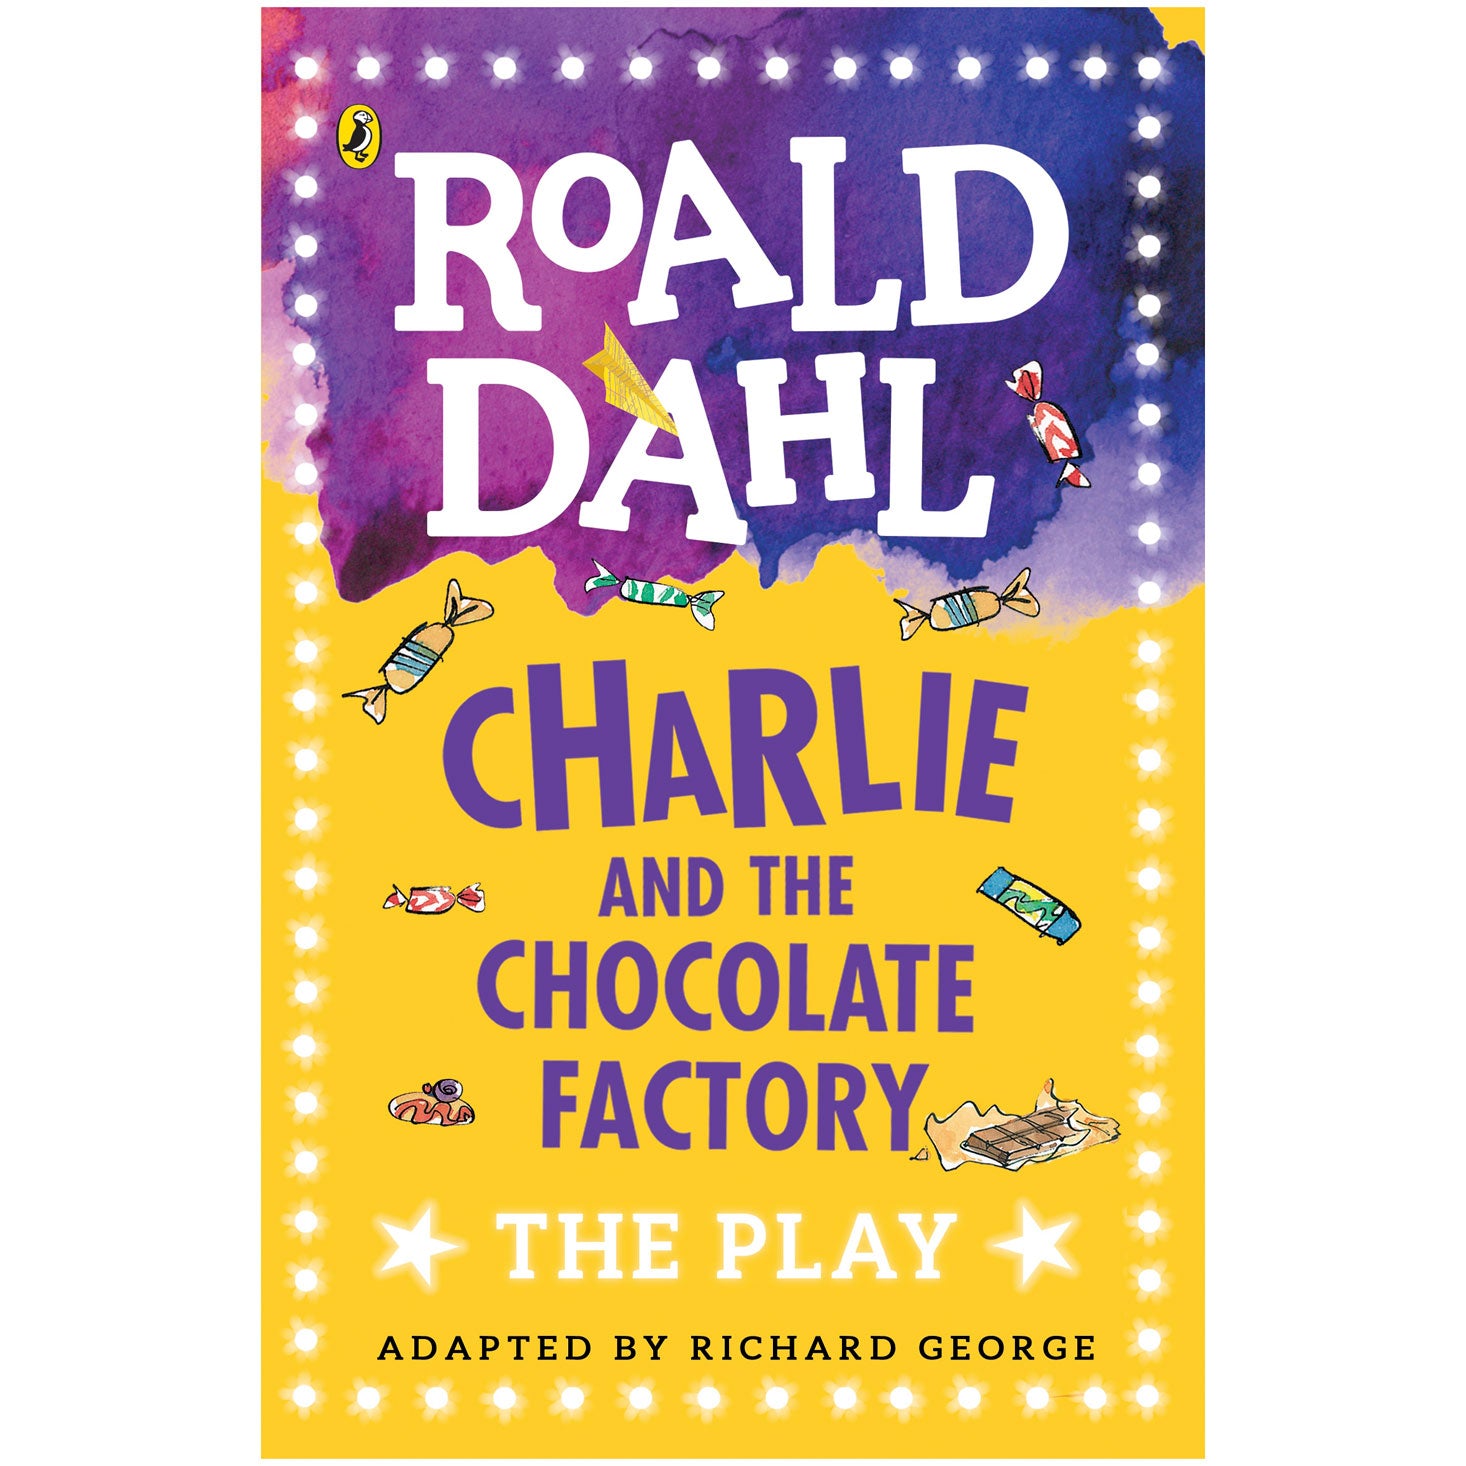 Charlie and the Chocolate Factory play based on Road Dahl's story with illustrations by Quentin Blake